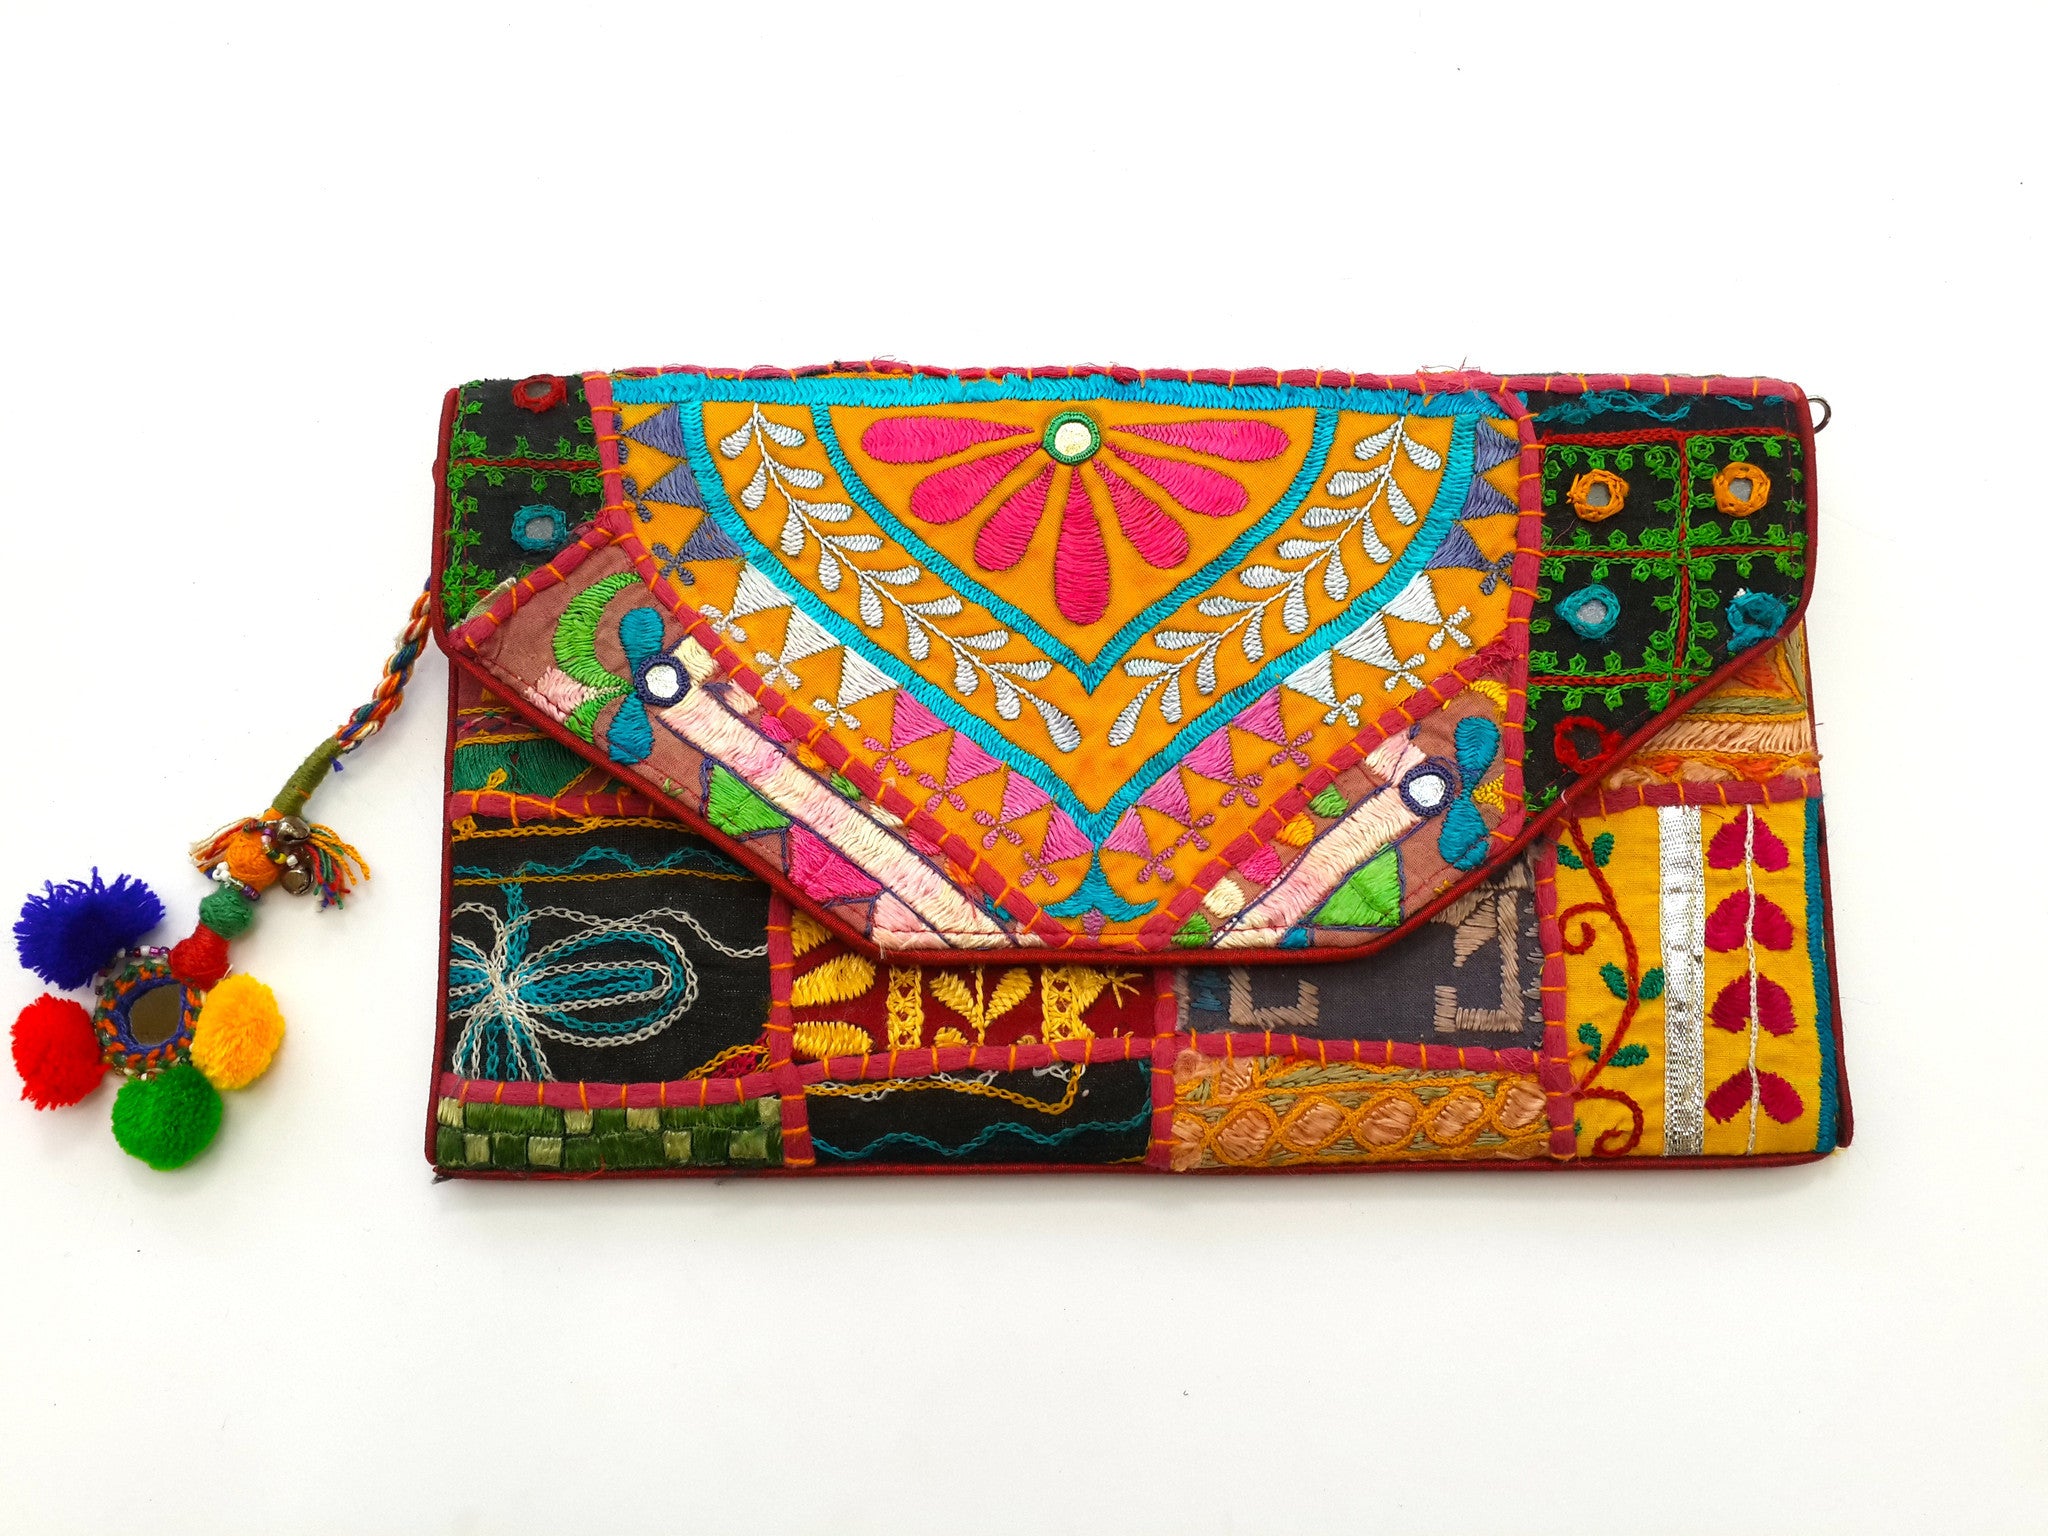 The wallet - Pachamama